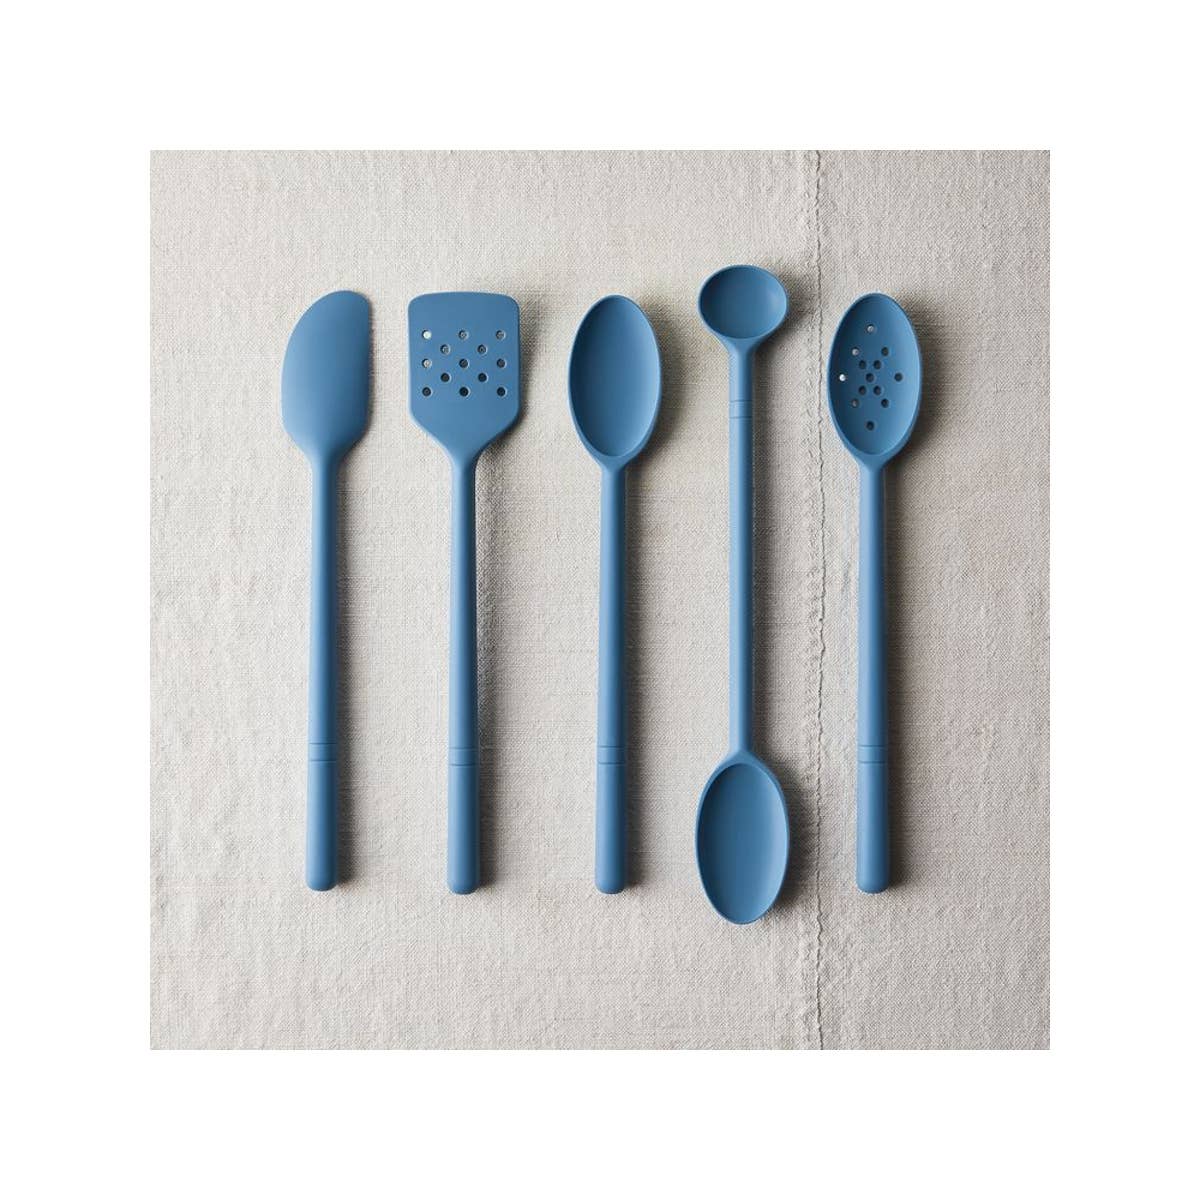 https://www.saveur.com/uploads/2021/10/07/Best-Silicone-Cooking-Utensils-Option_-Five-Two-Silicone-Spoons.jpg?auto=webp&auto=webp&optimize=high&quality=70&width=1440